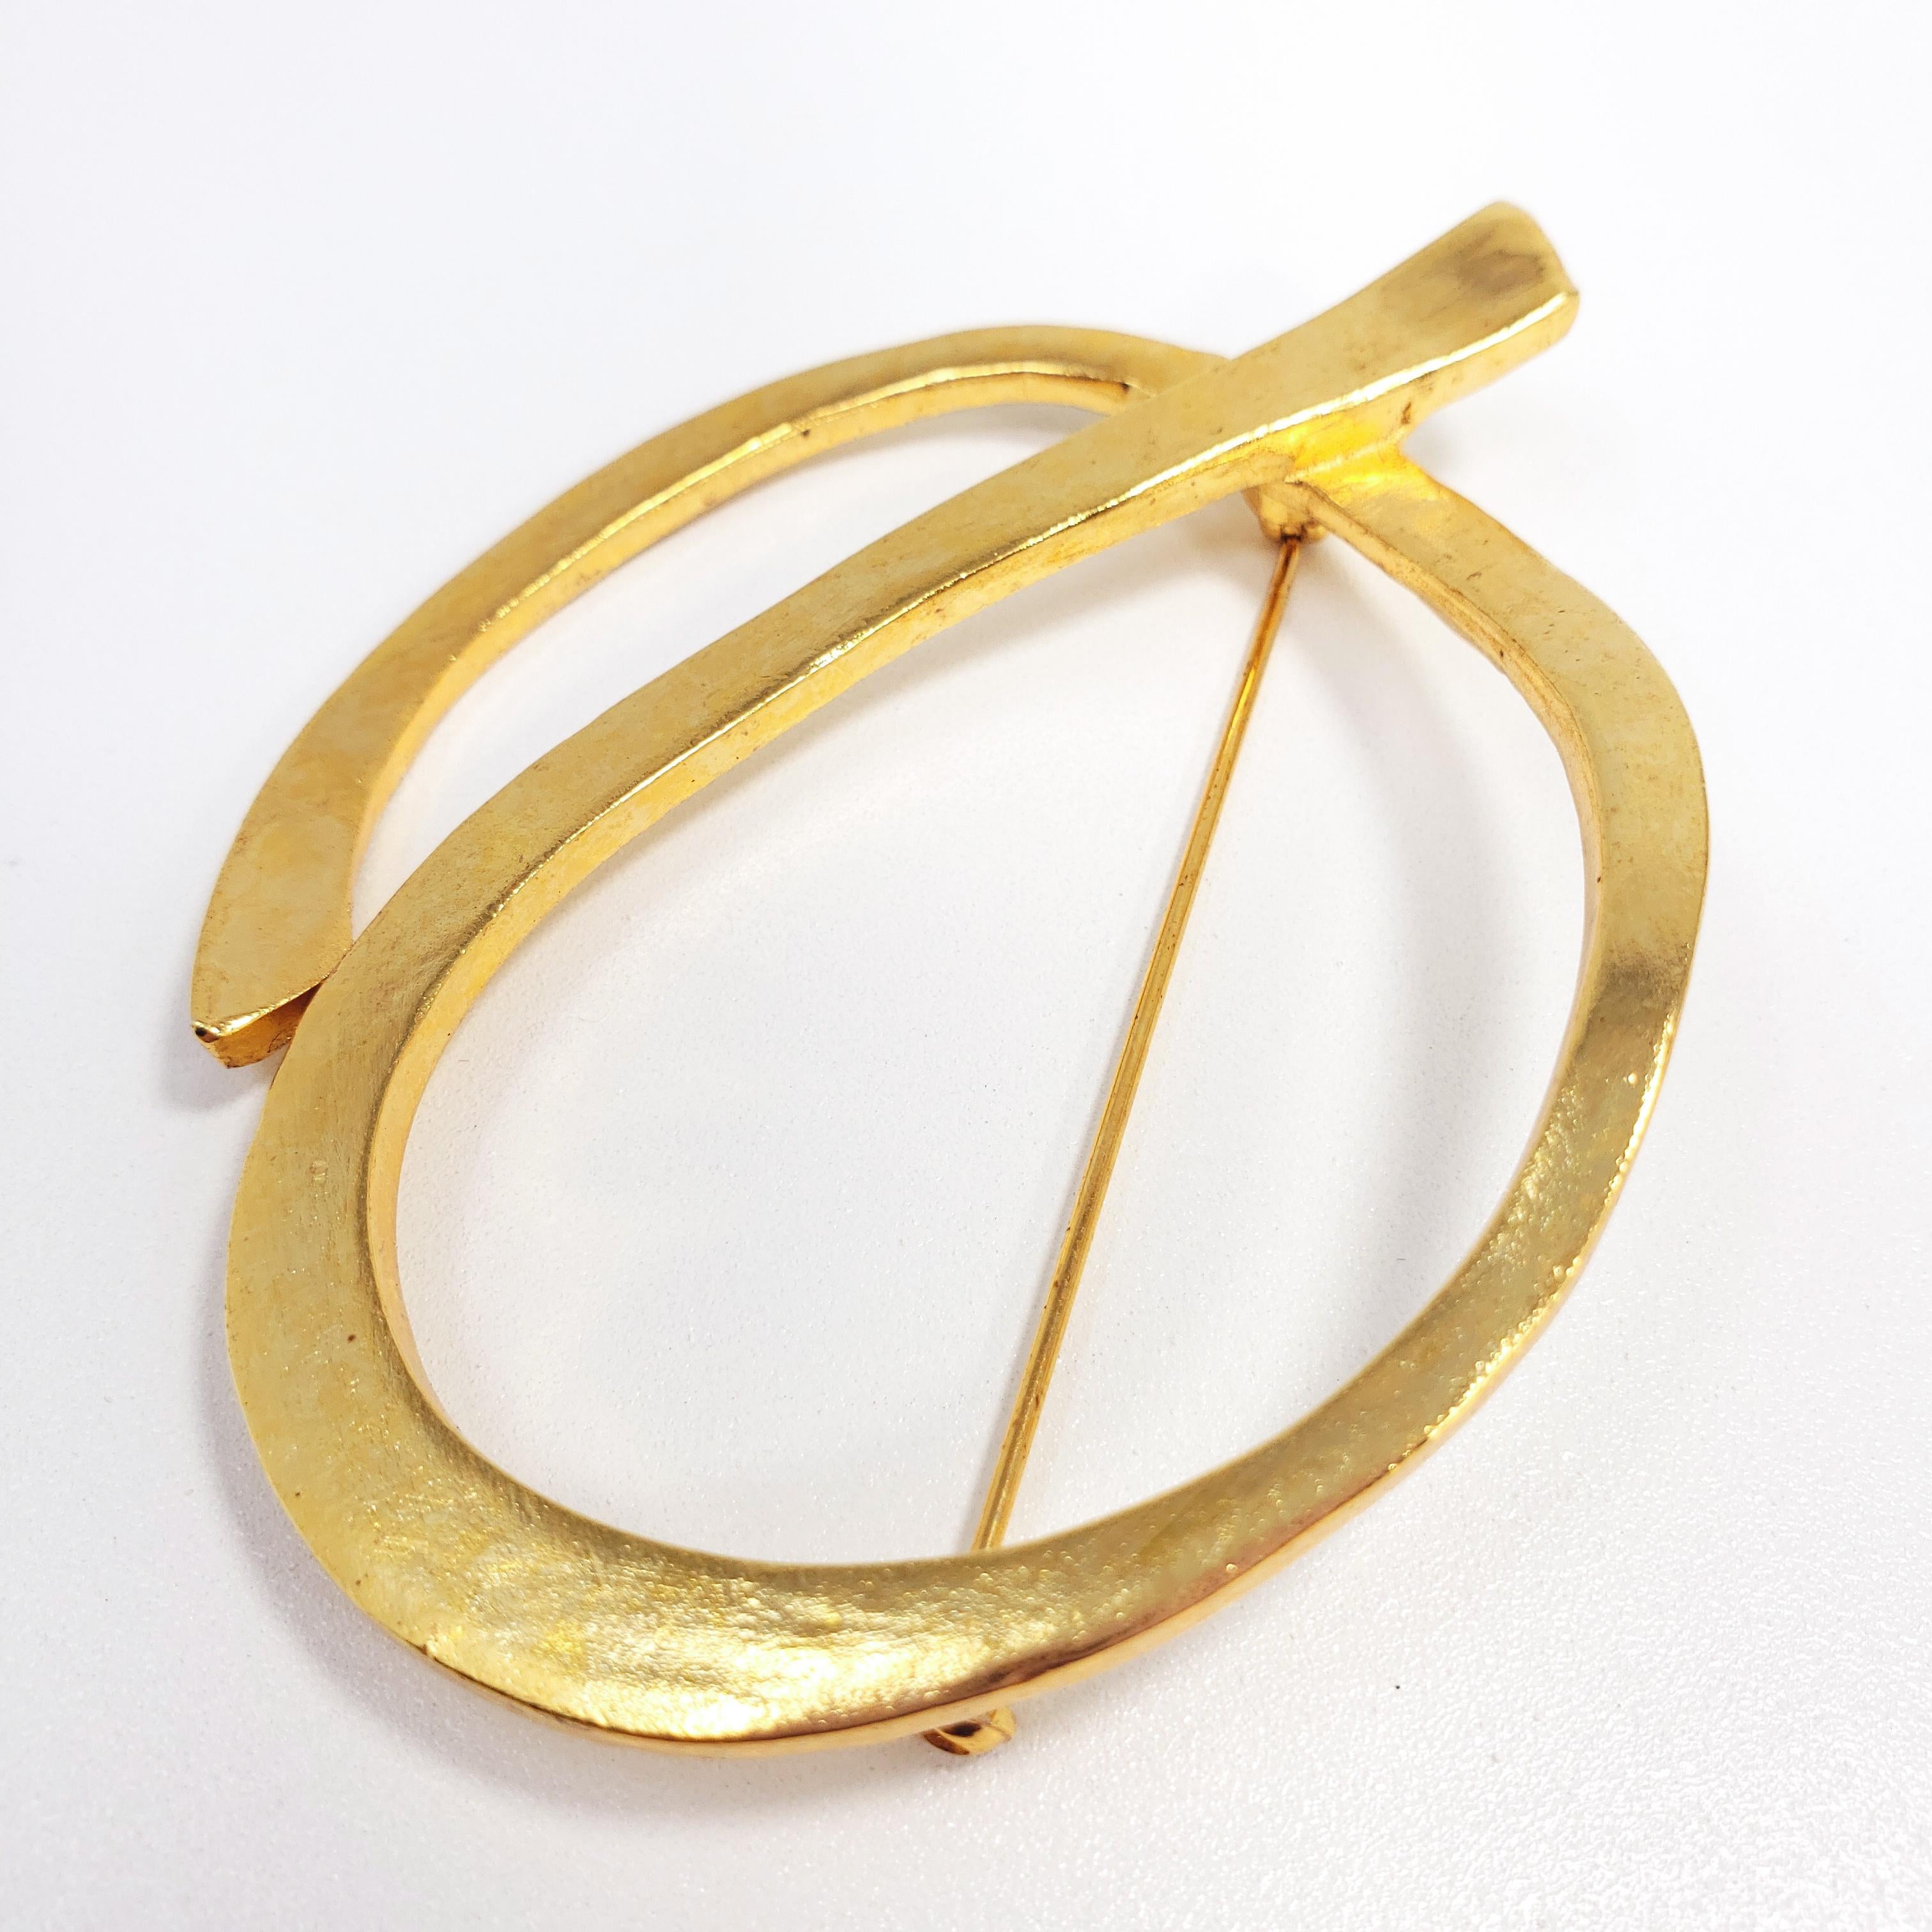 Oscar de la Renta Abstract Modernist Ribbon Statement Brooch Pin in Gold In New Condition For Sale In Milford, DE